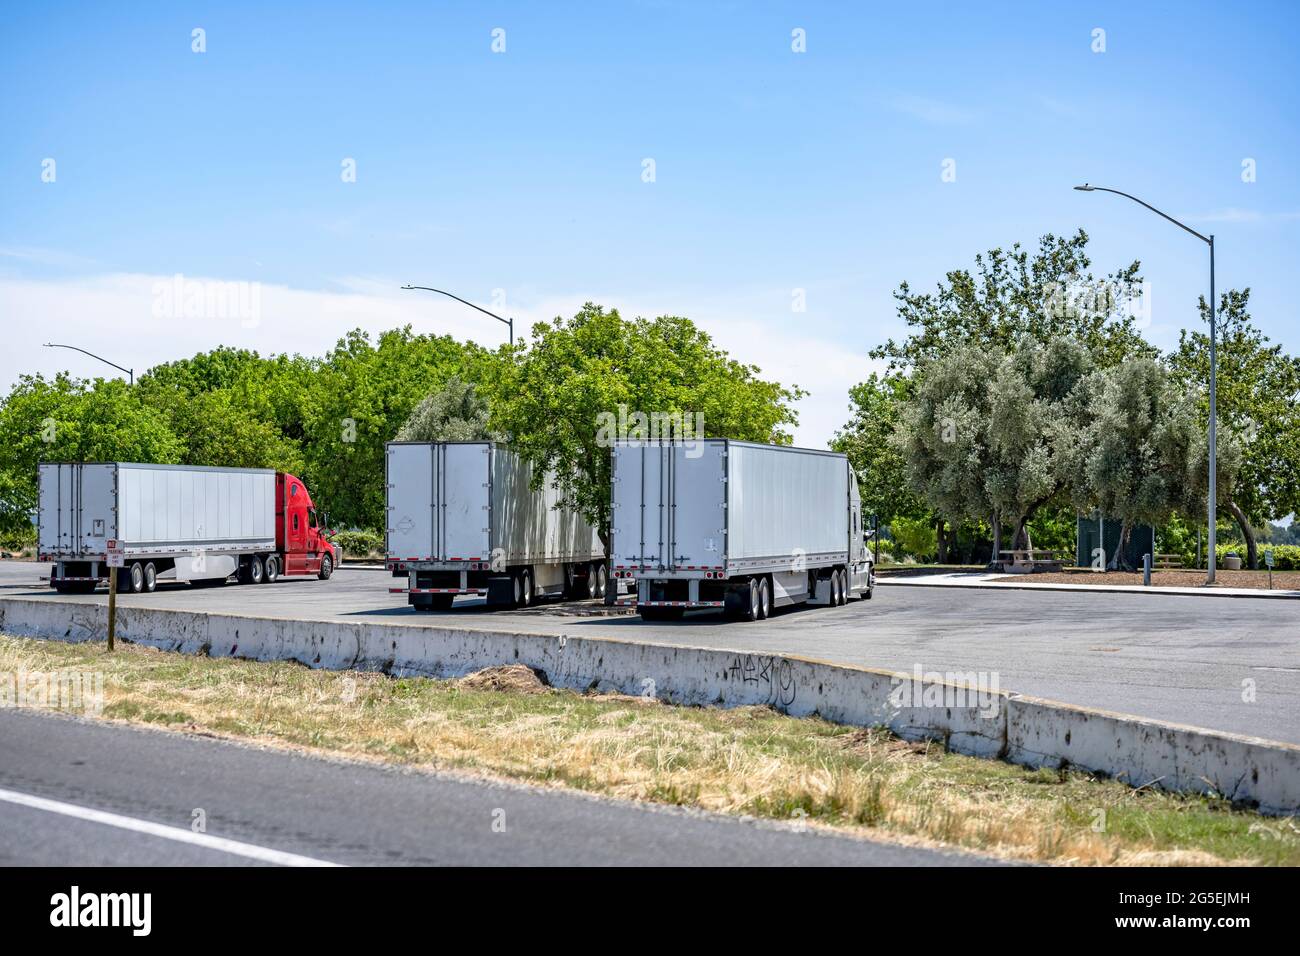 Group of big rigs semi trucks tractors transporting cargo in different semi trailers standing in a line by the side for a break on the rest area parki Stock Photo